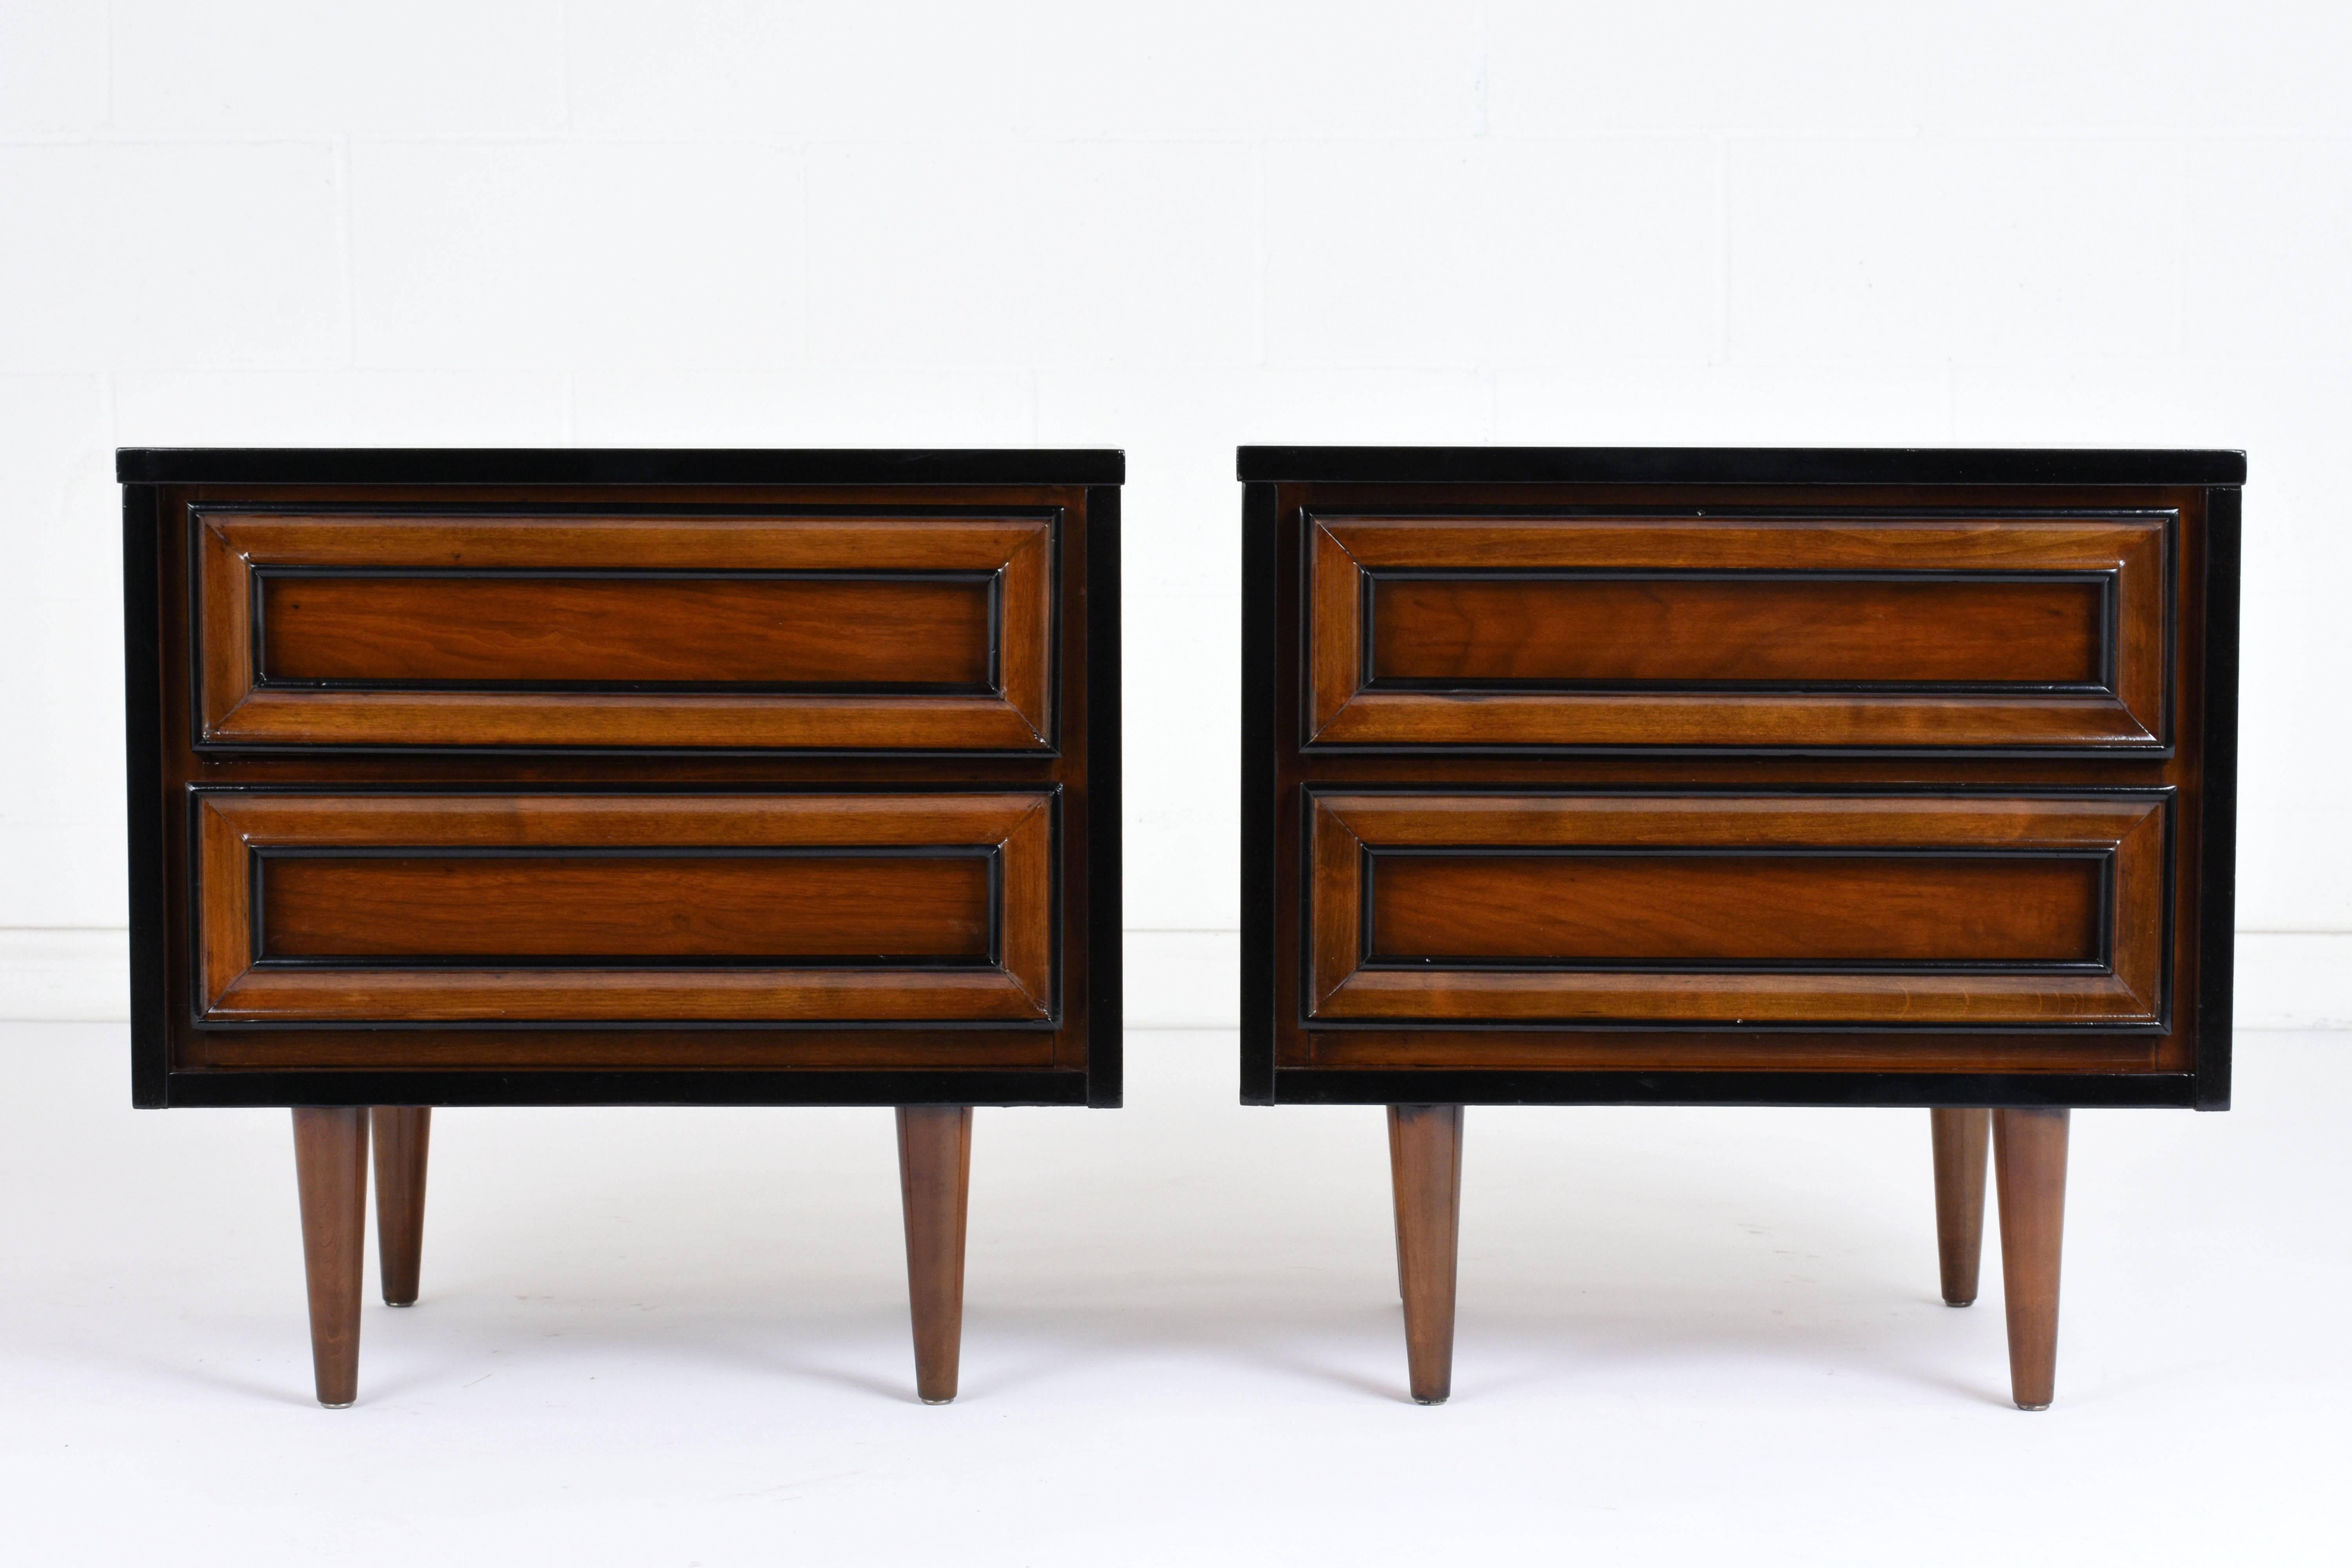 This pair of 1960s vintage Mid-Century Modern style nightstands are made of walnut wood stained in a walnut color with black accents and a lacquered finish. The edges of the nightstands and the moulding on the drawers are painted in a deep black